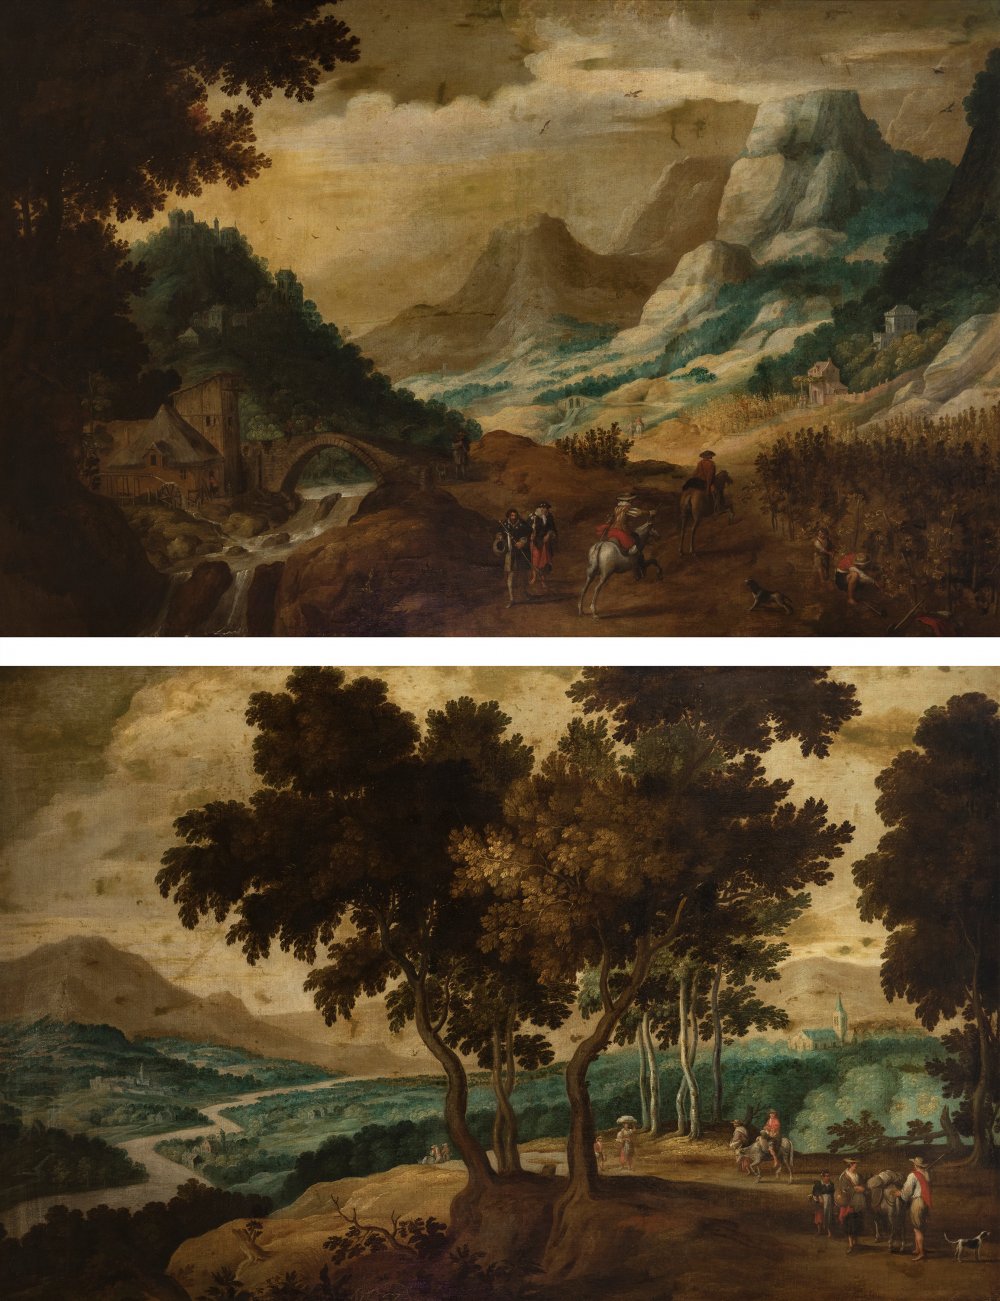 Flemish school; mid-17th century."Landscapes".Oil on canvas.The two paintings are re-drawn.They